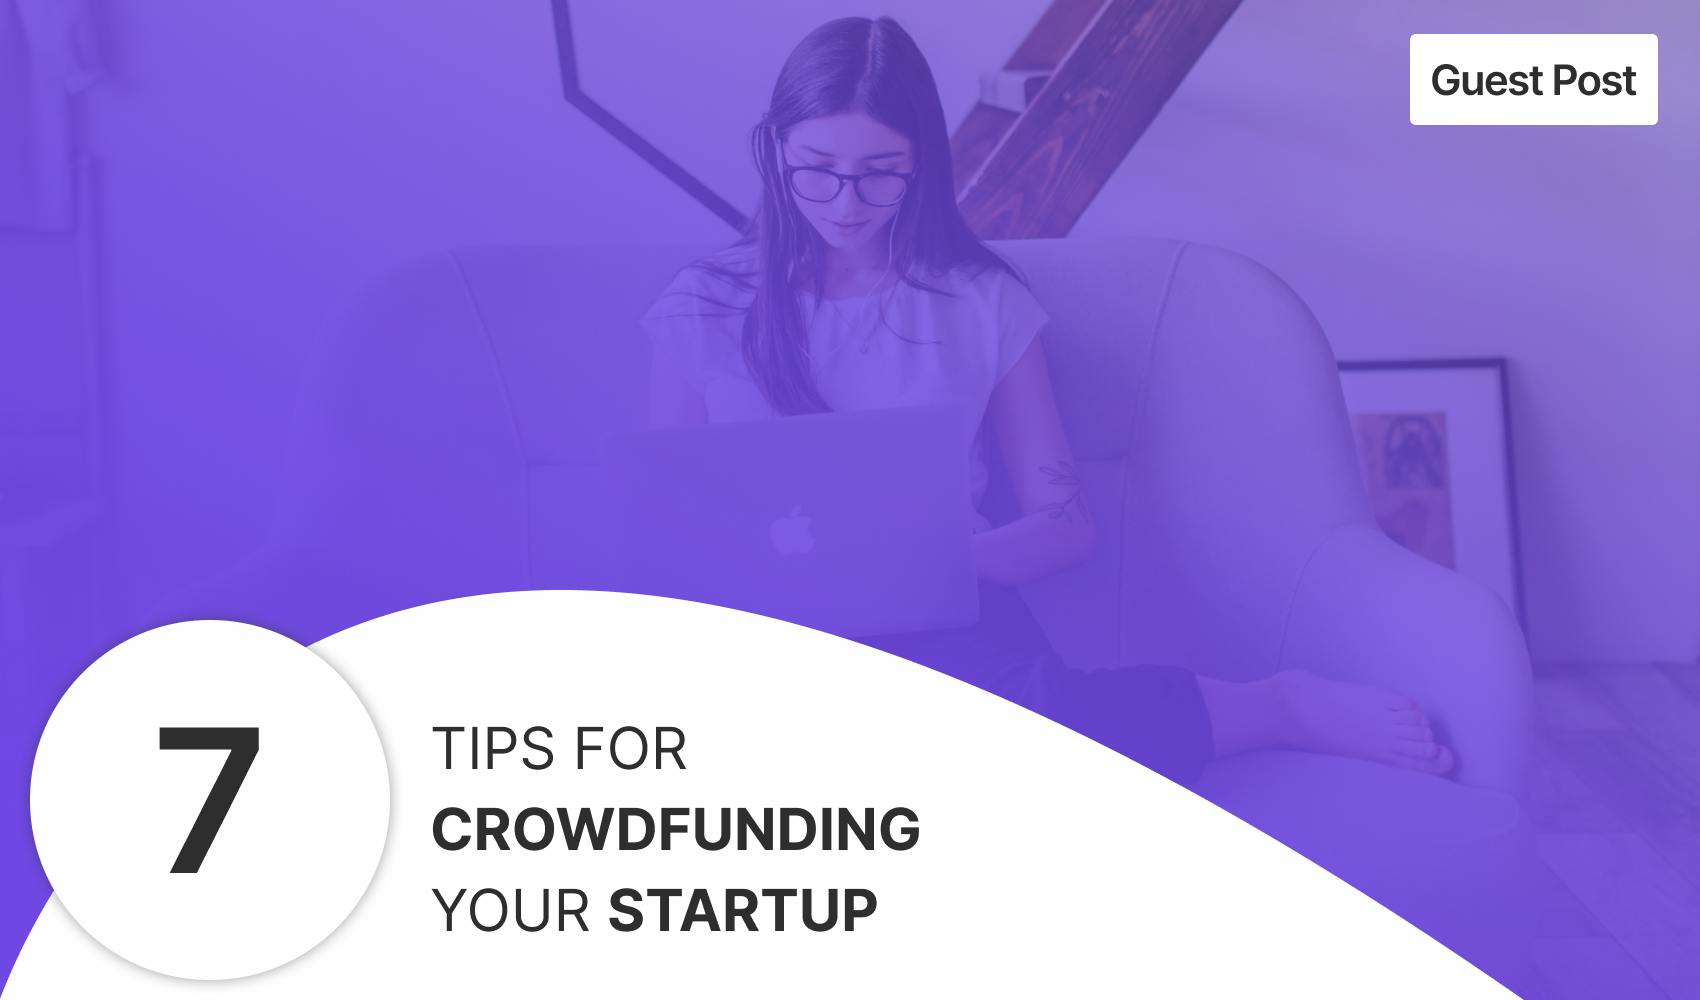 Crowdfunding your startup